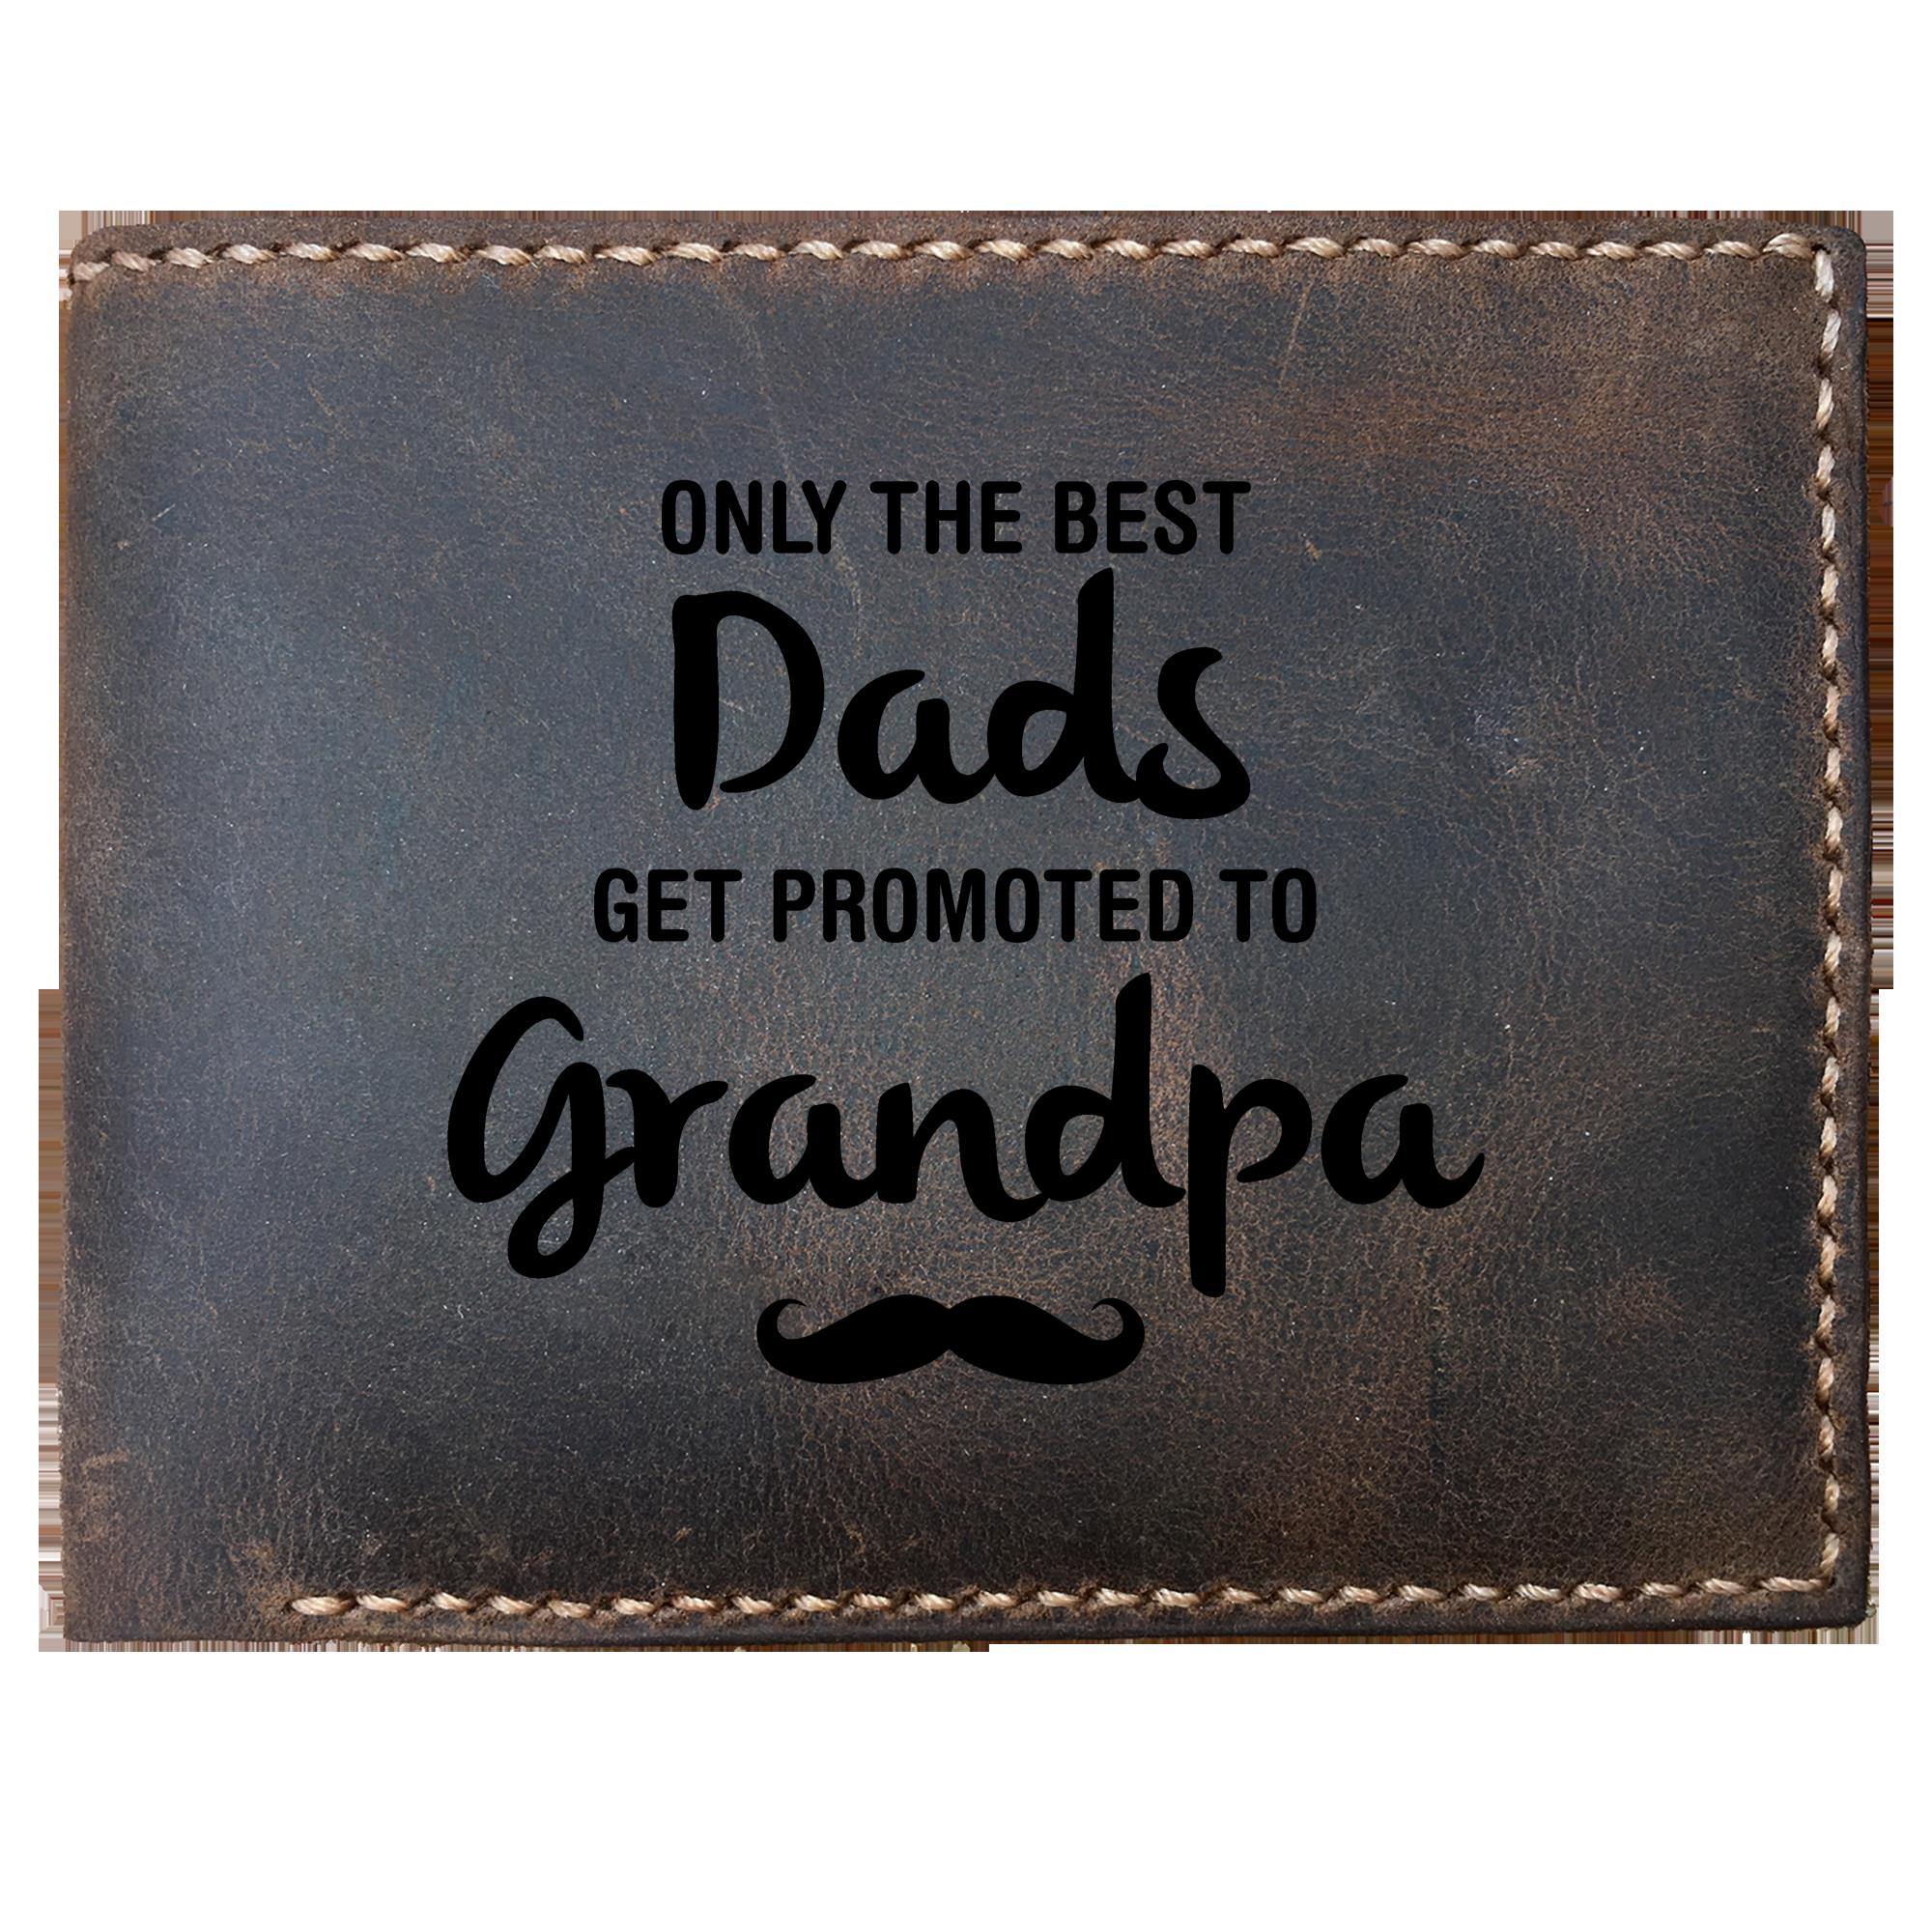 Skitongifts Funny Custom Laser Engraved Bifold Leather Wallet For Men, The Best Dads Get Promoted To Grandpa